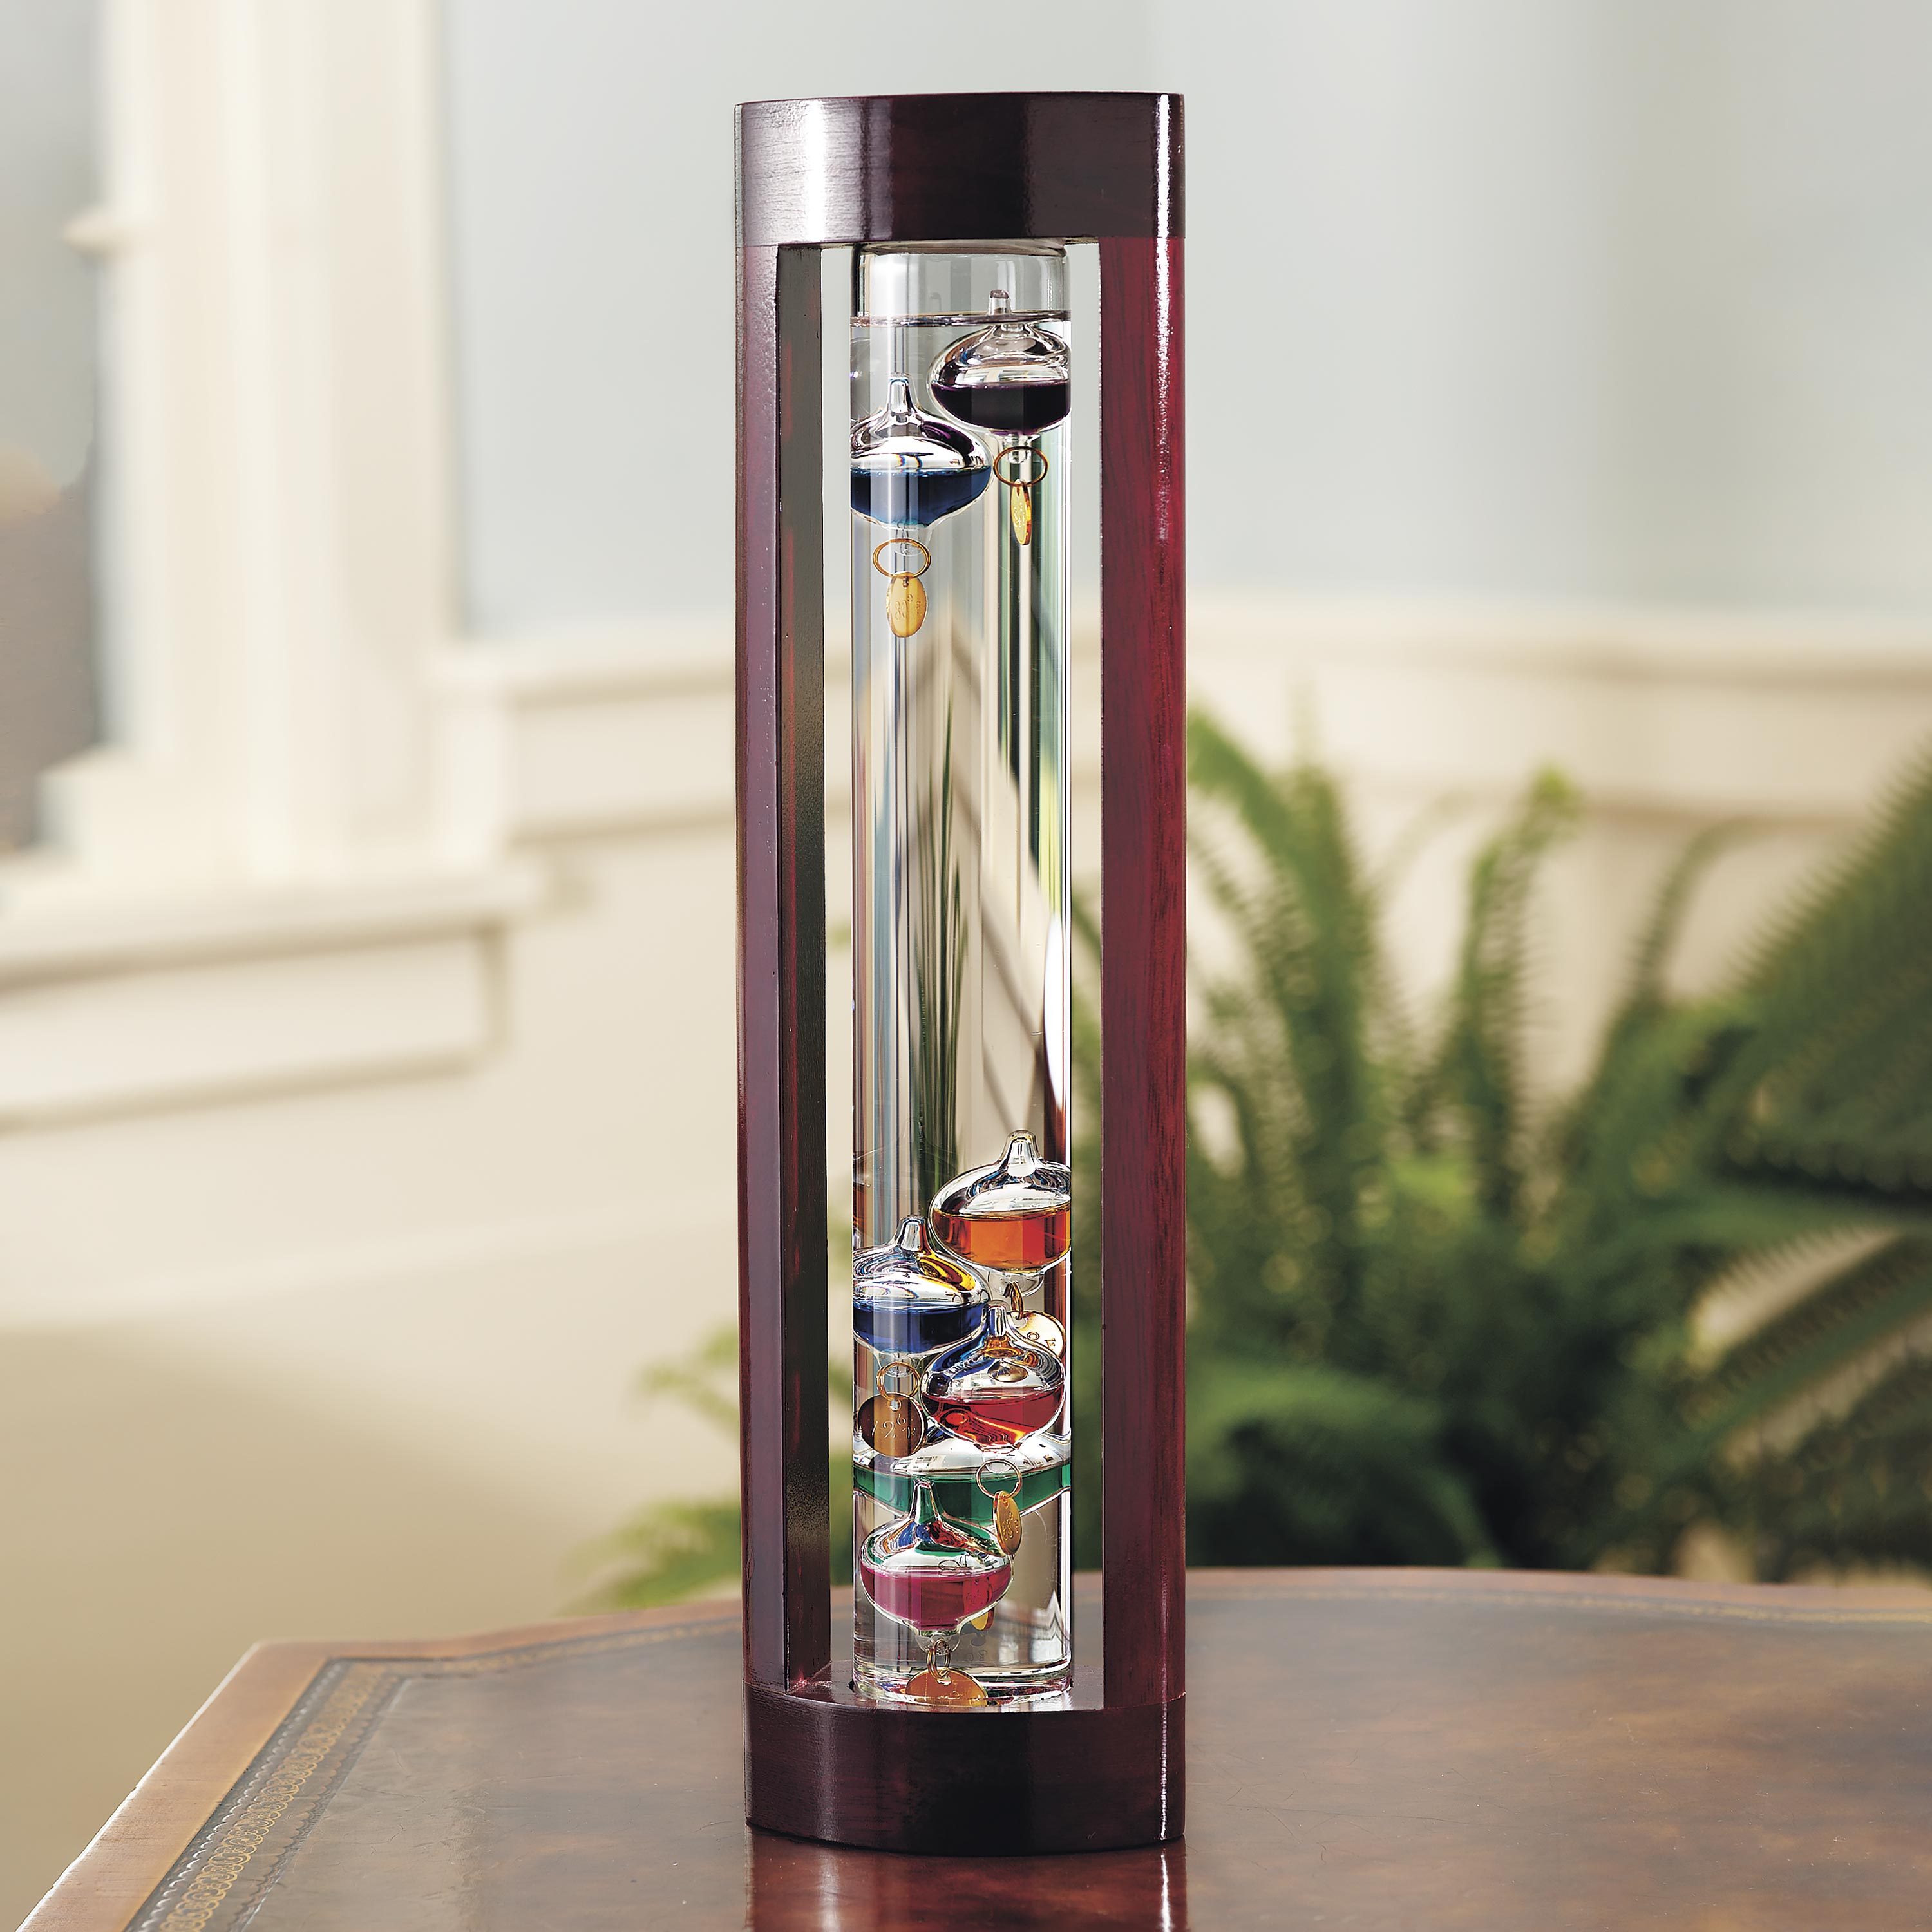 Galileo thermometer with colorful glass bubbles in liquid giving